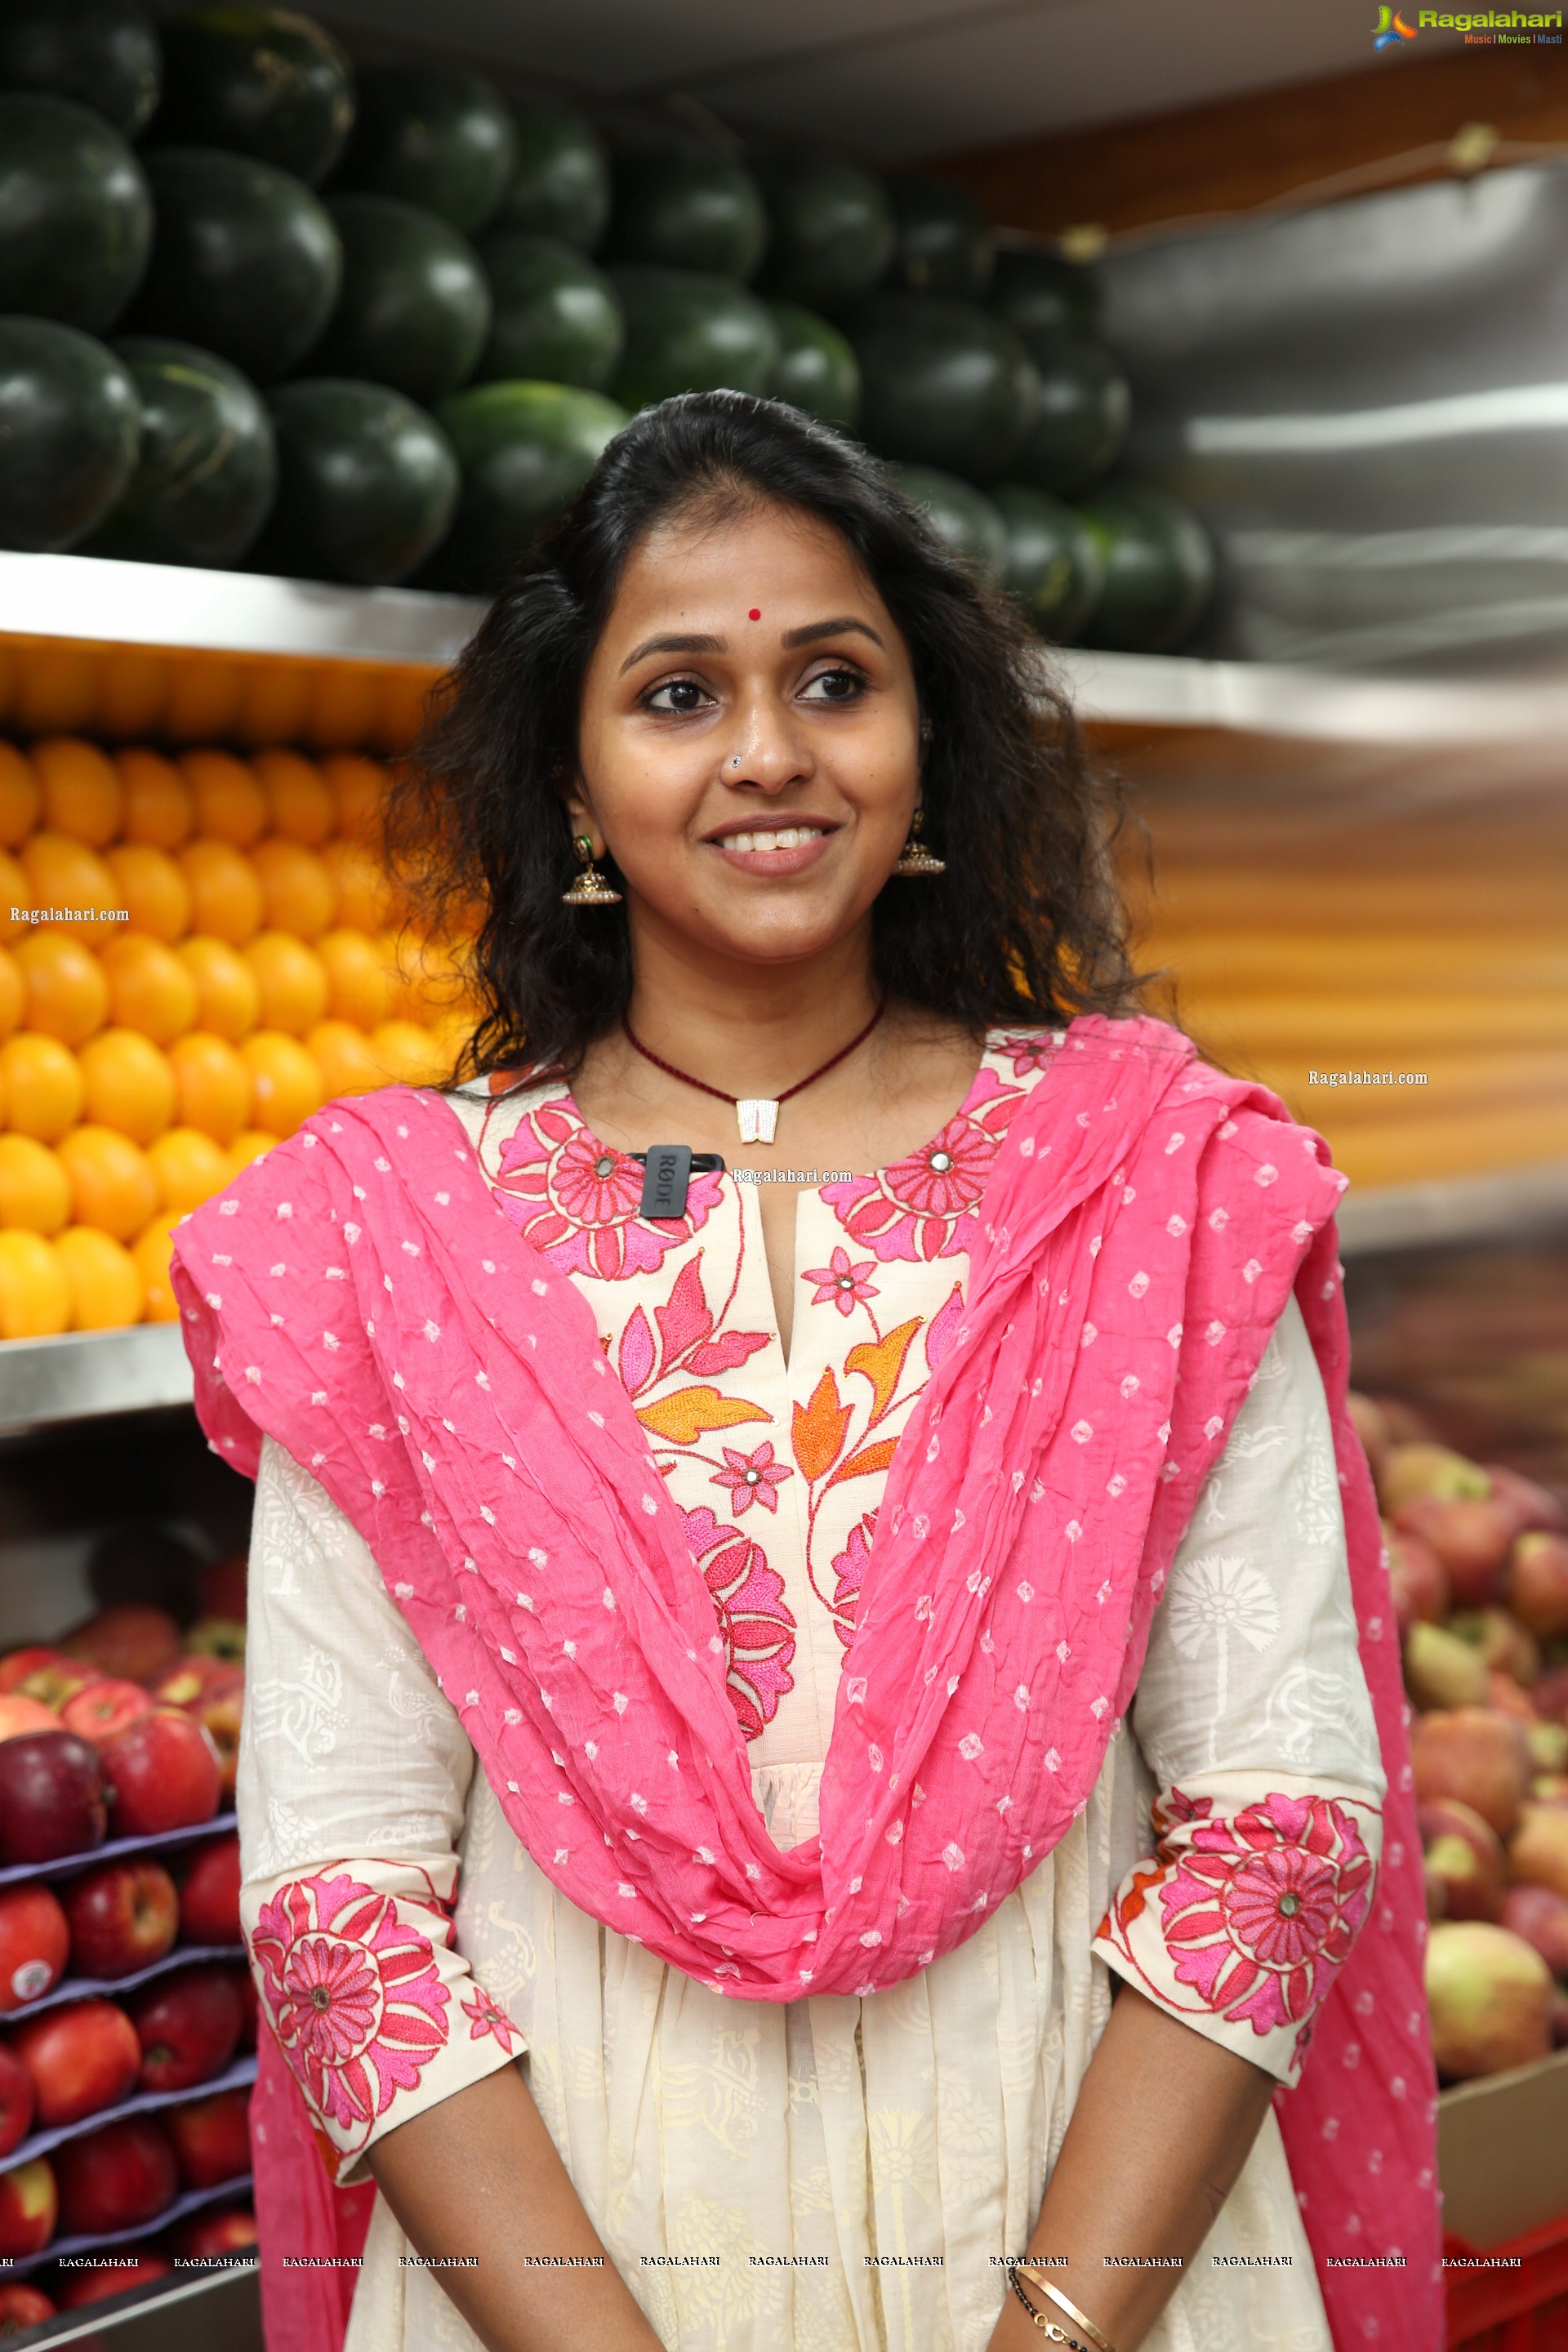 Smita at Pure O Natural outlet Opening, HD Gallery